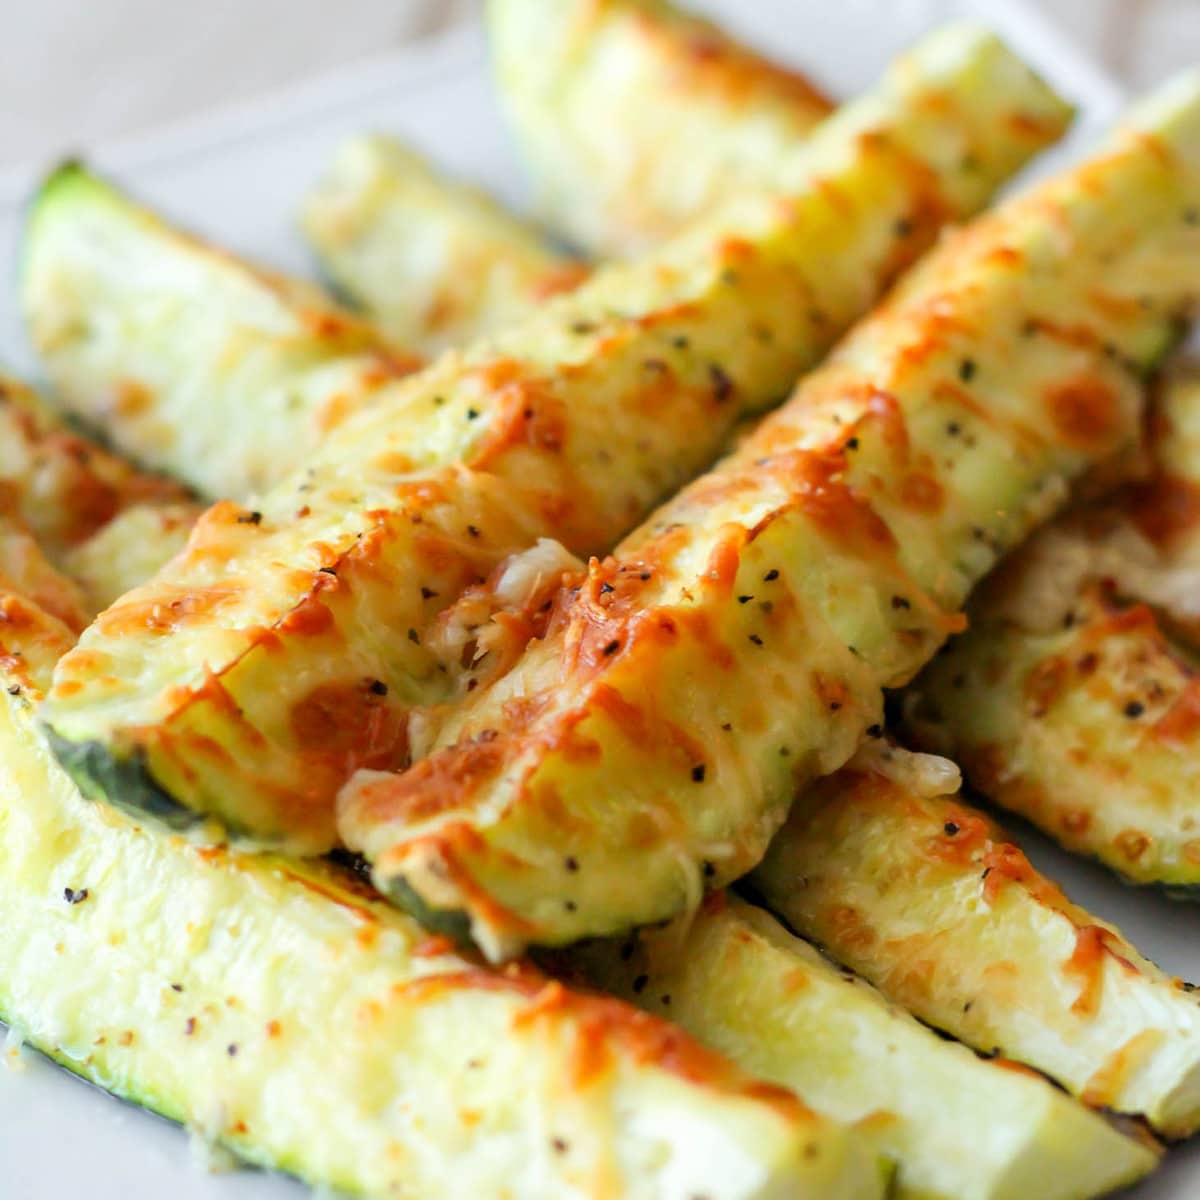 Vegetable side dishes - parmesan crusted zucchini piled on a white plate.